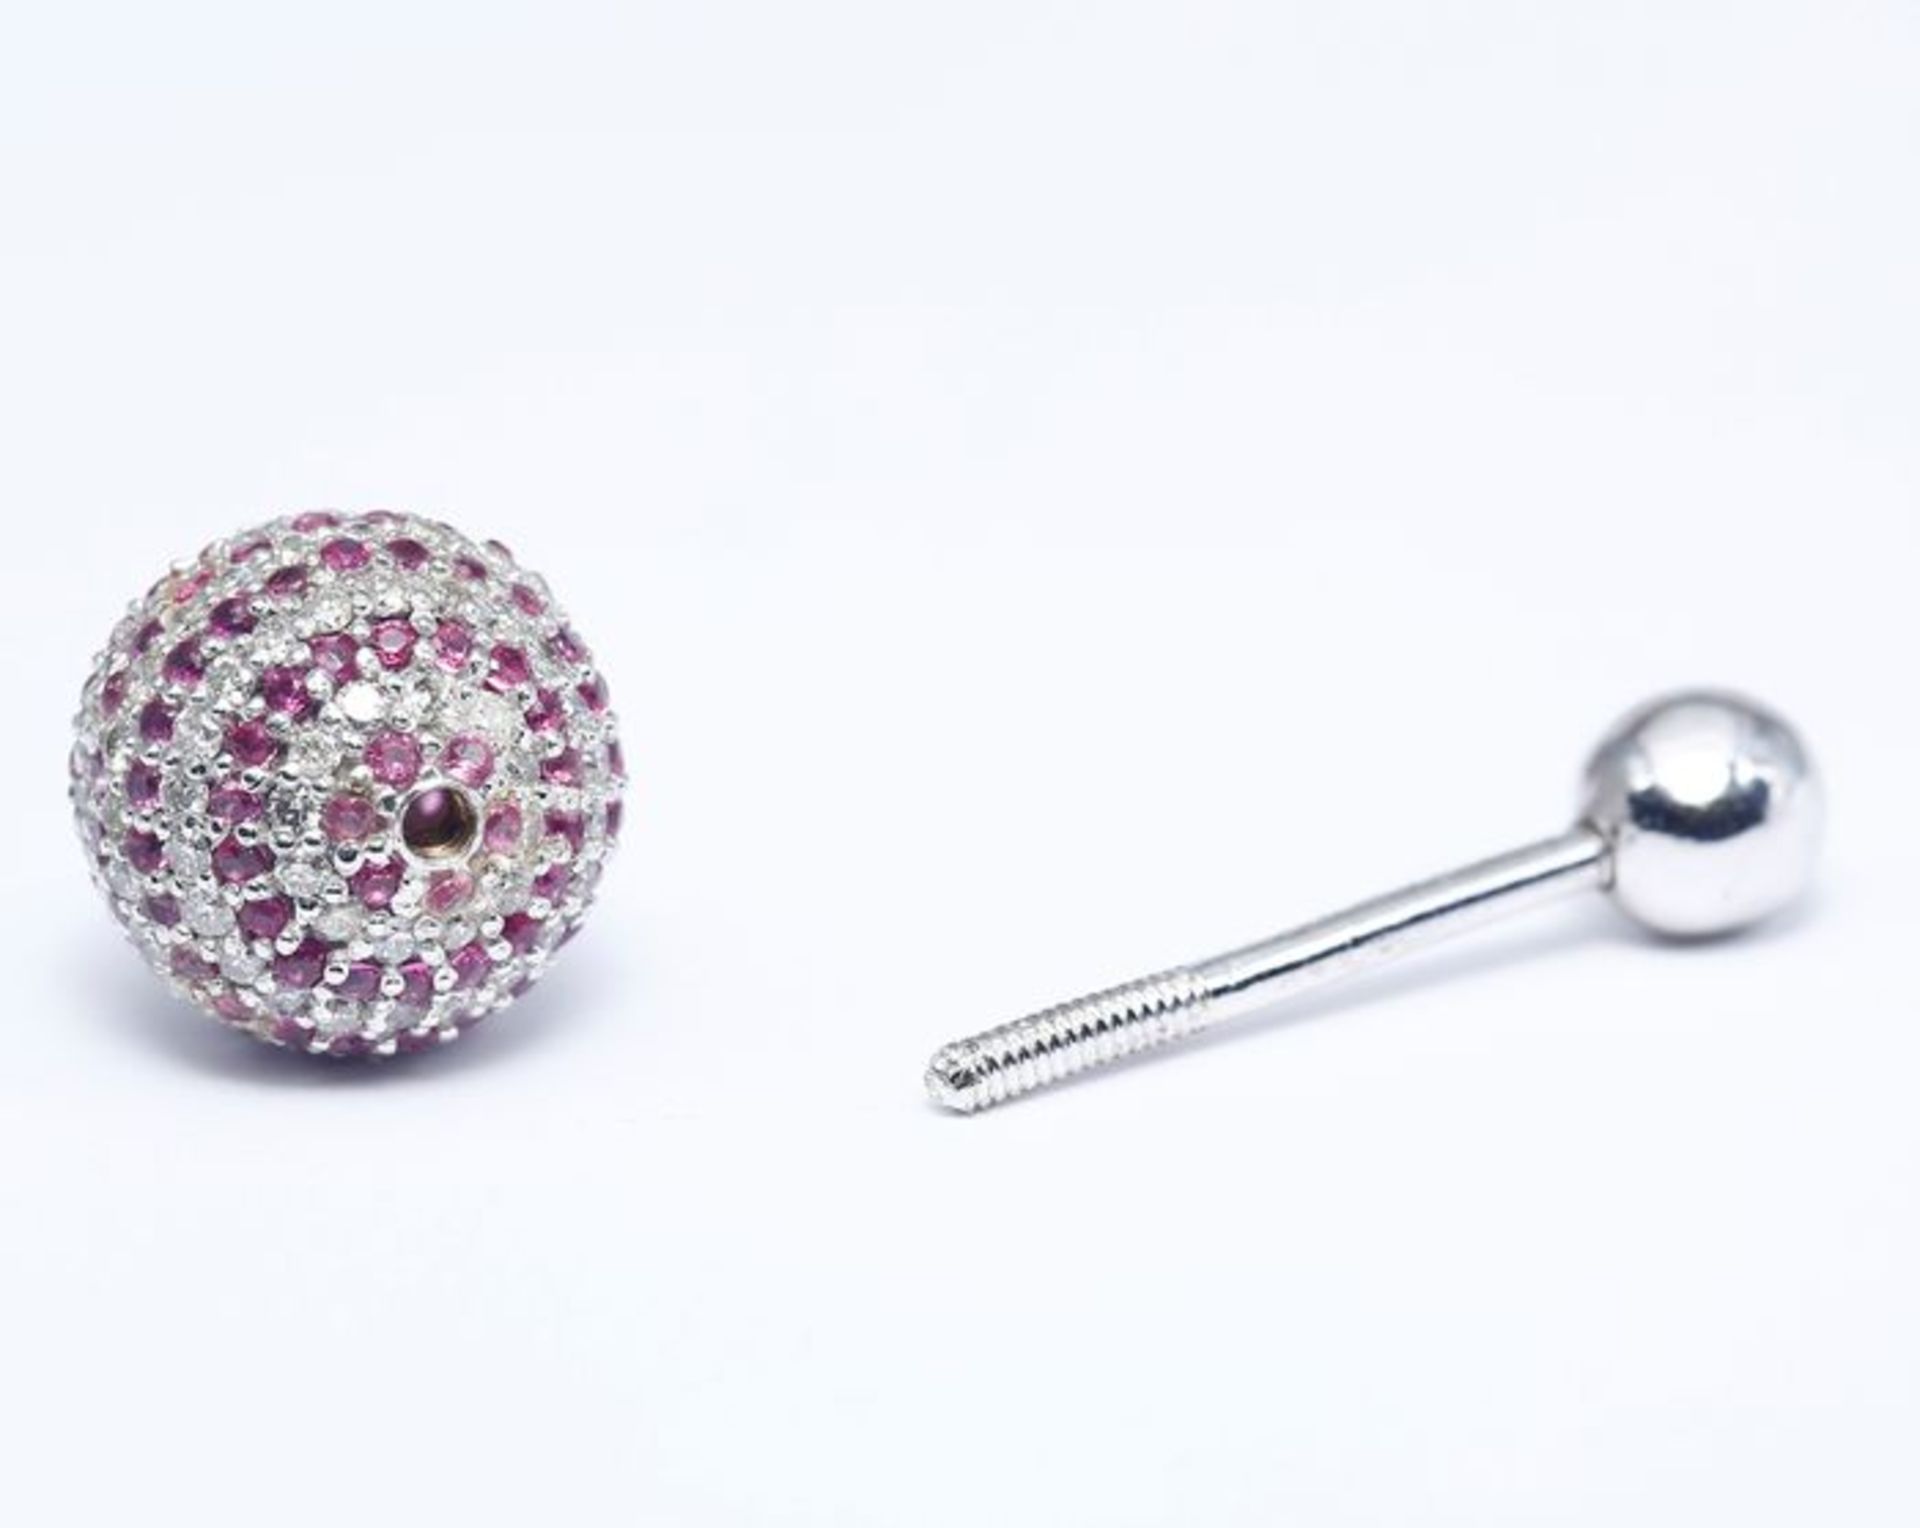 14 K / 585 White Gold Diamond and Ruby Navel Ring - Image 3 of 3